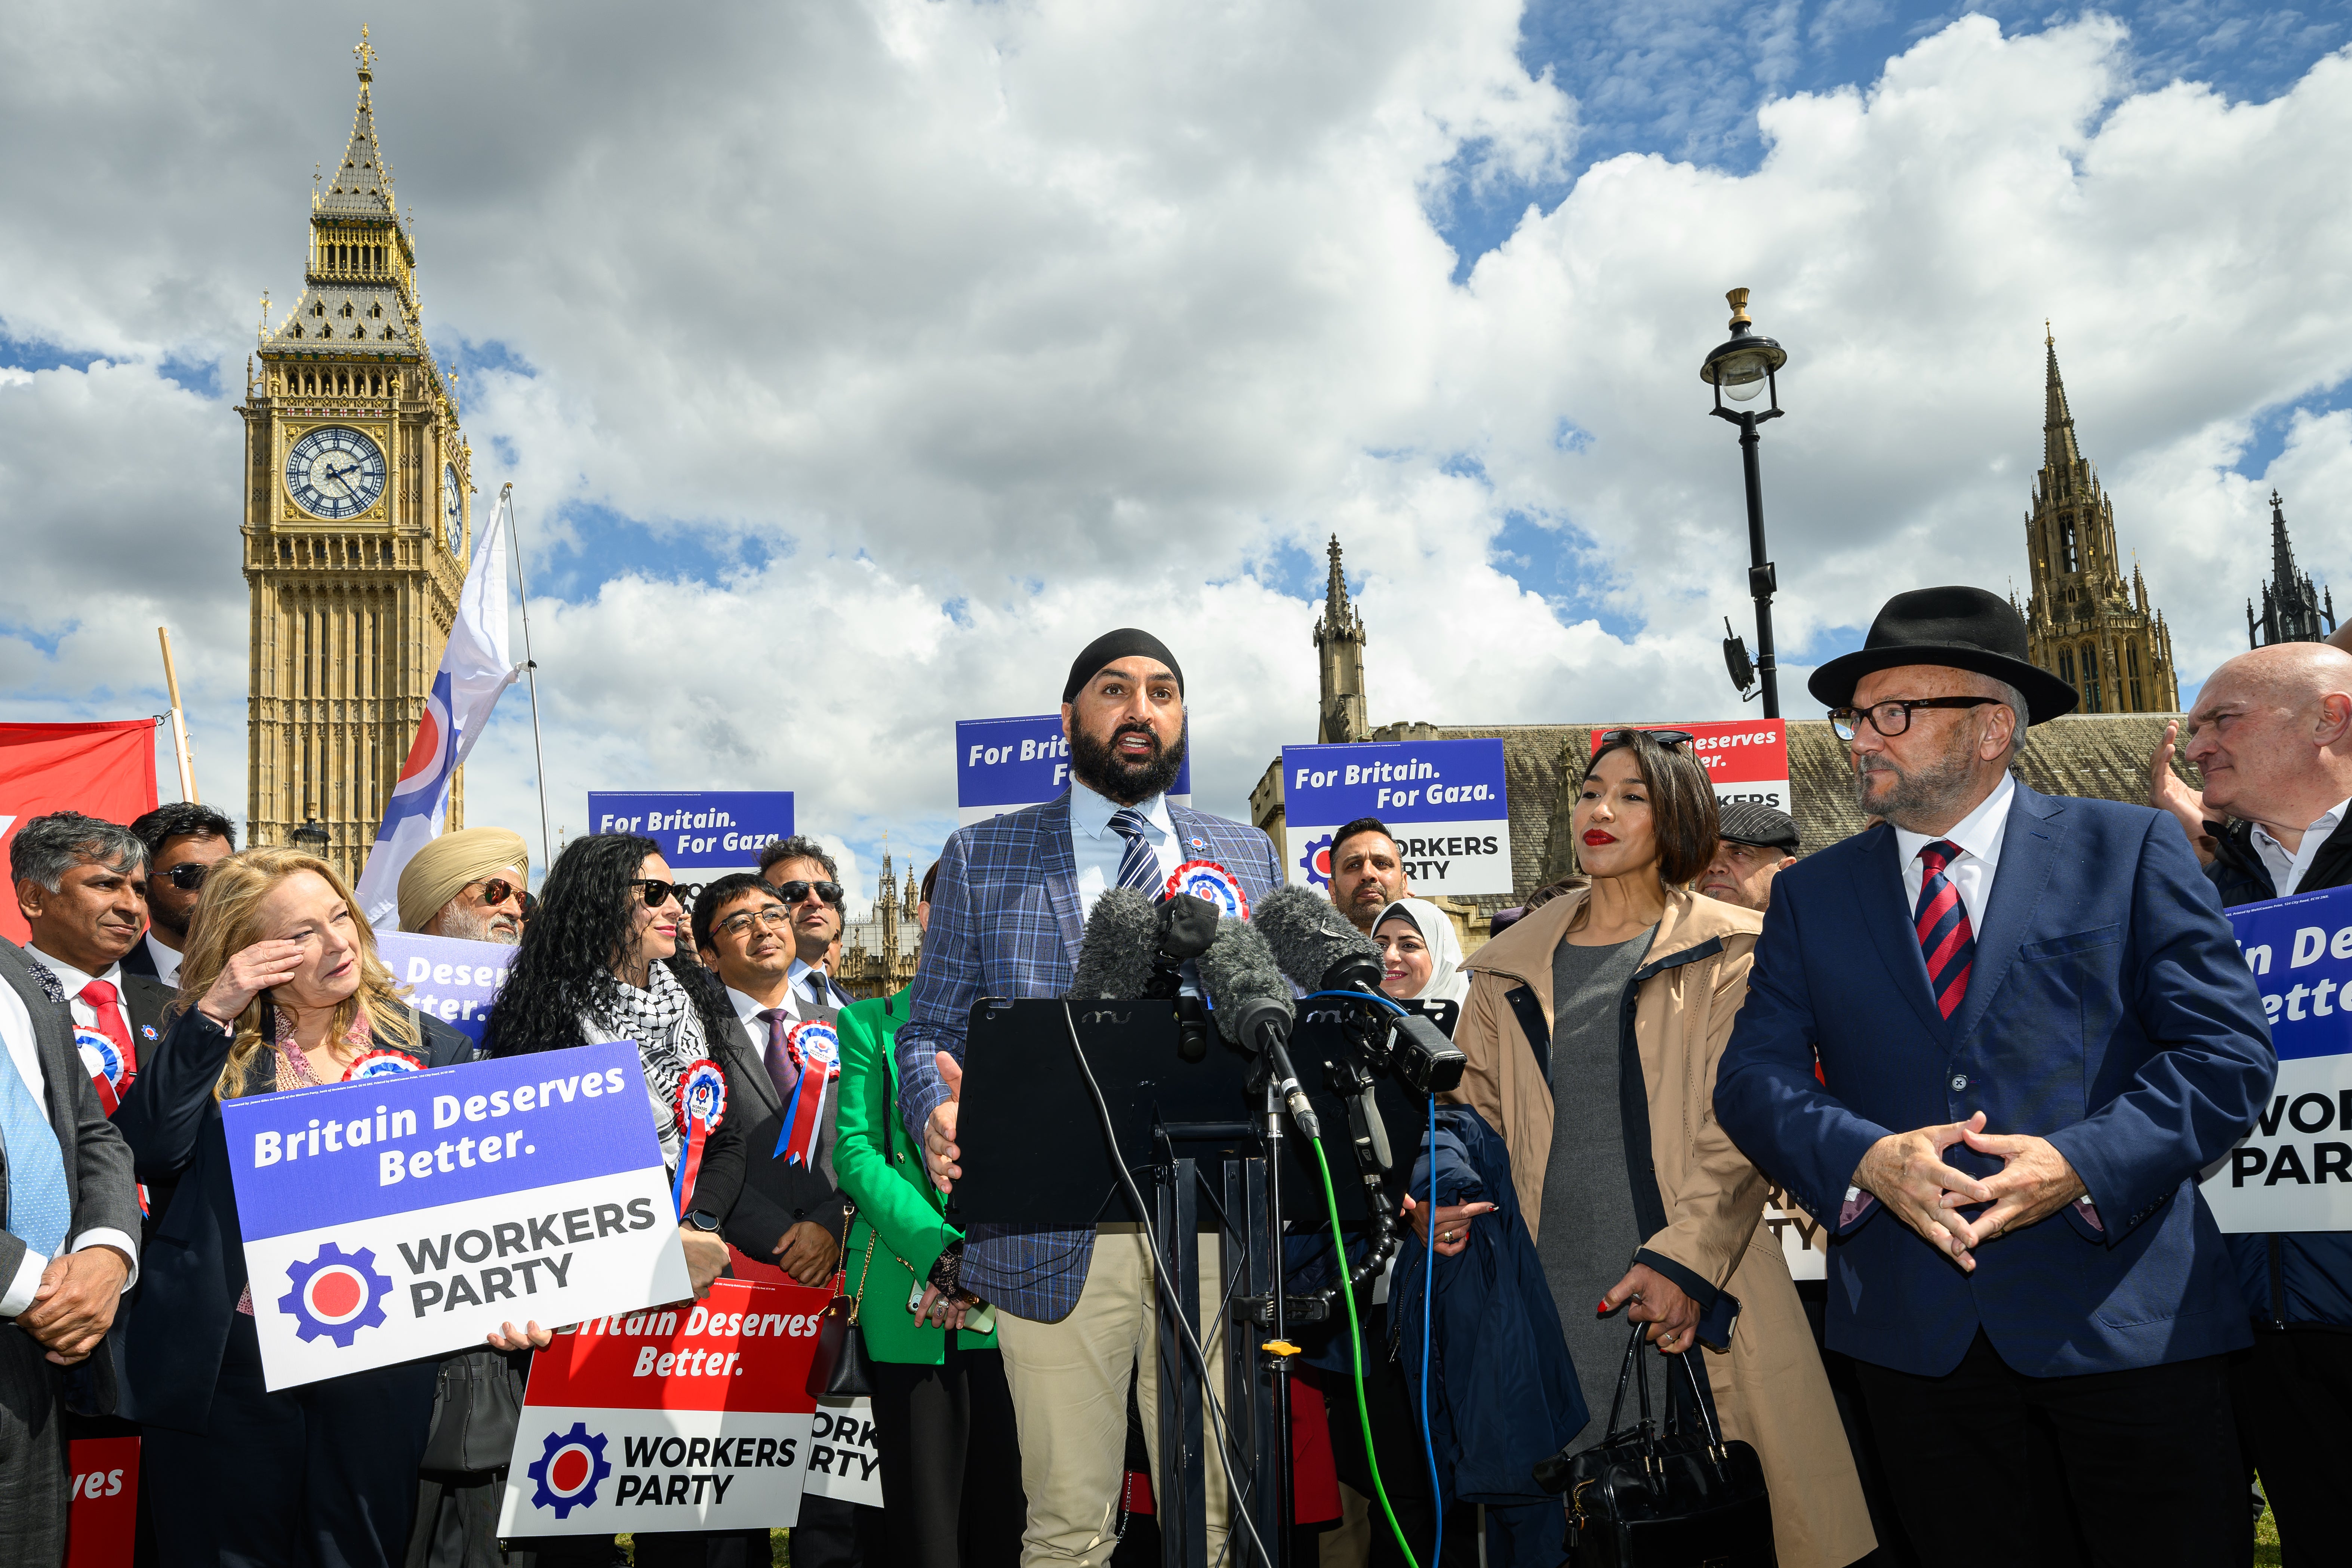 Monty Panesar said he was ‘still learning about how politics can help people’